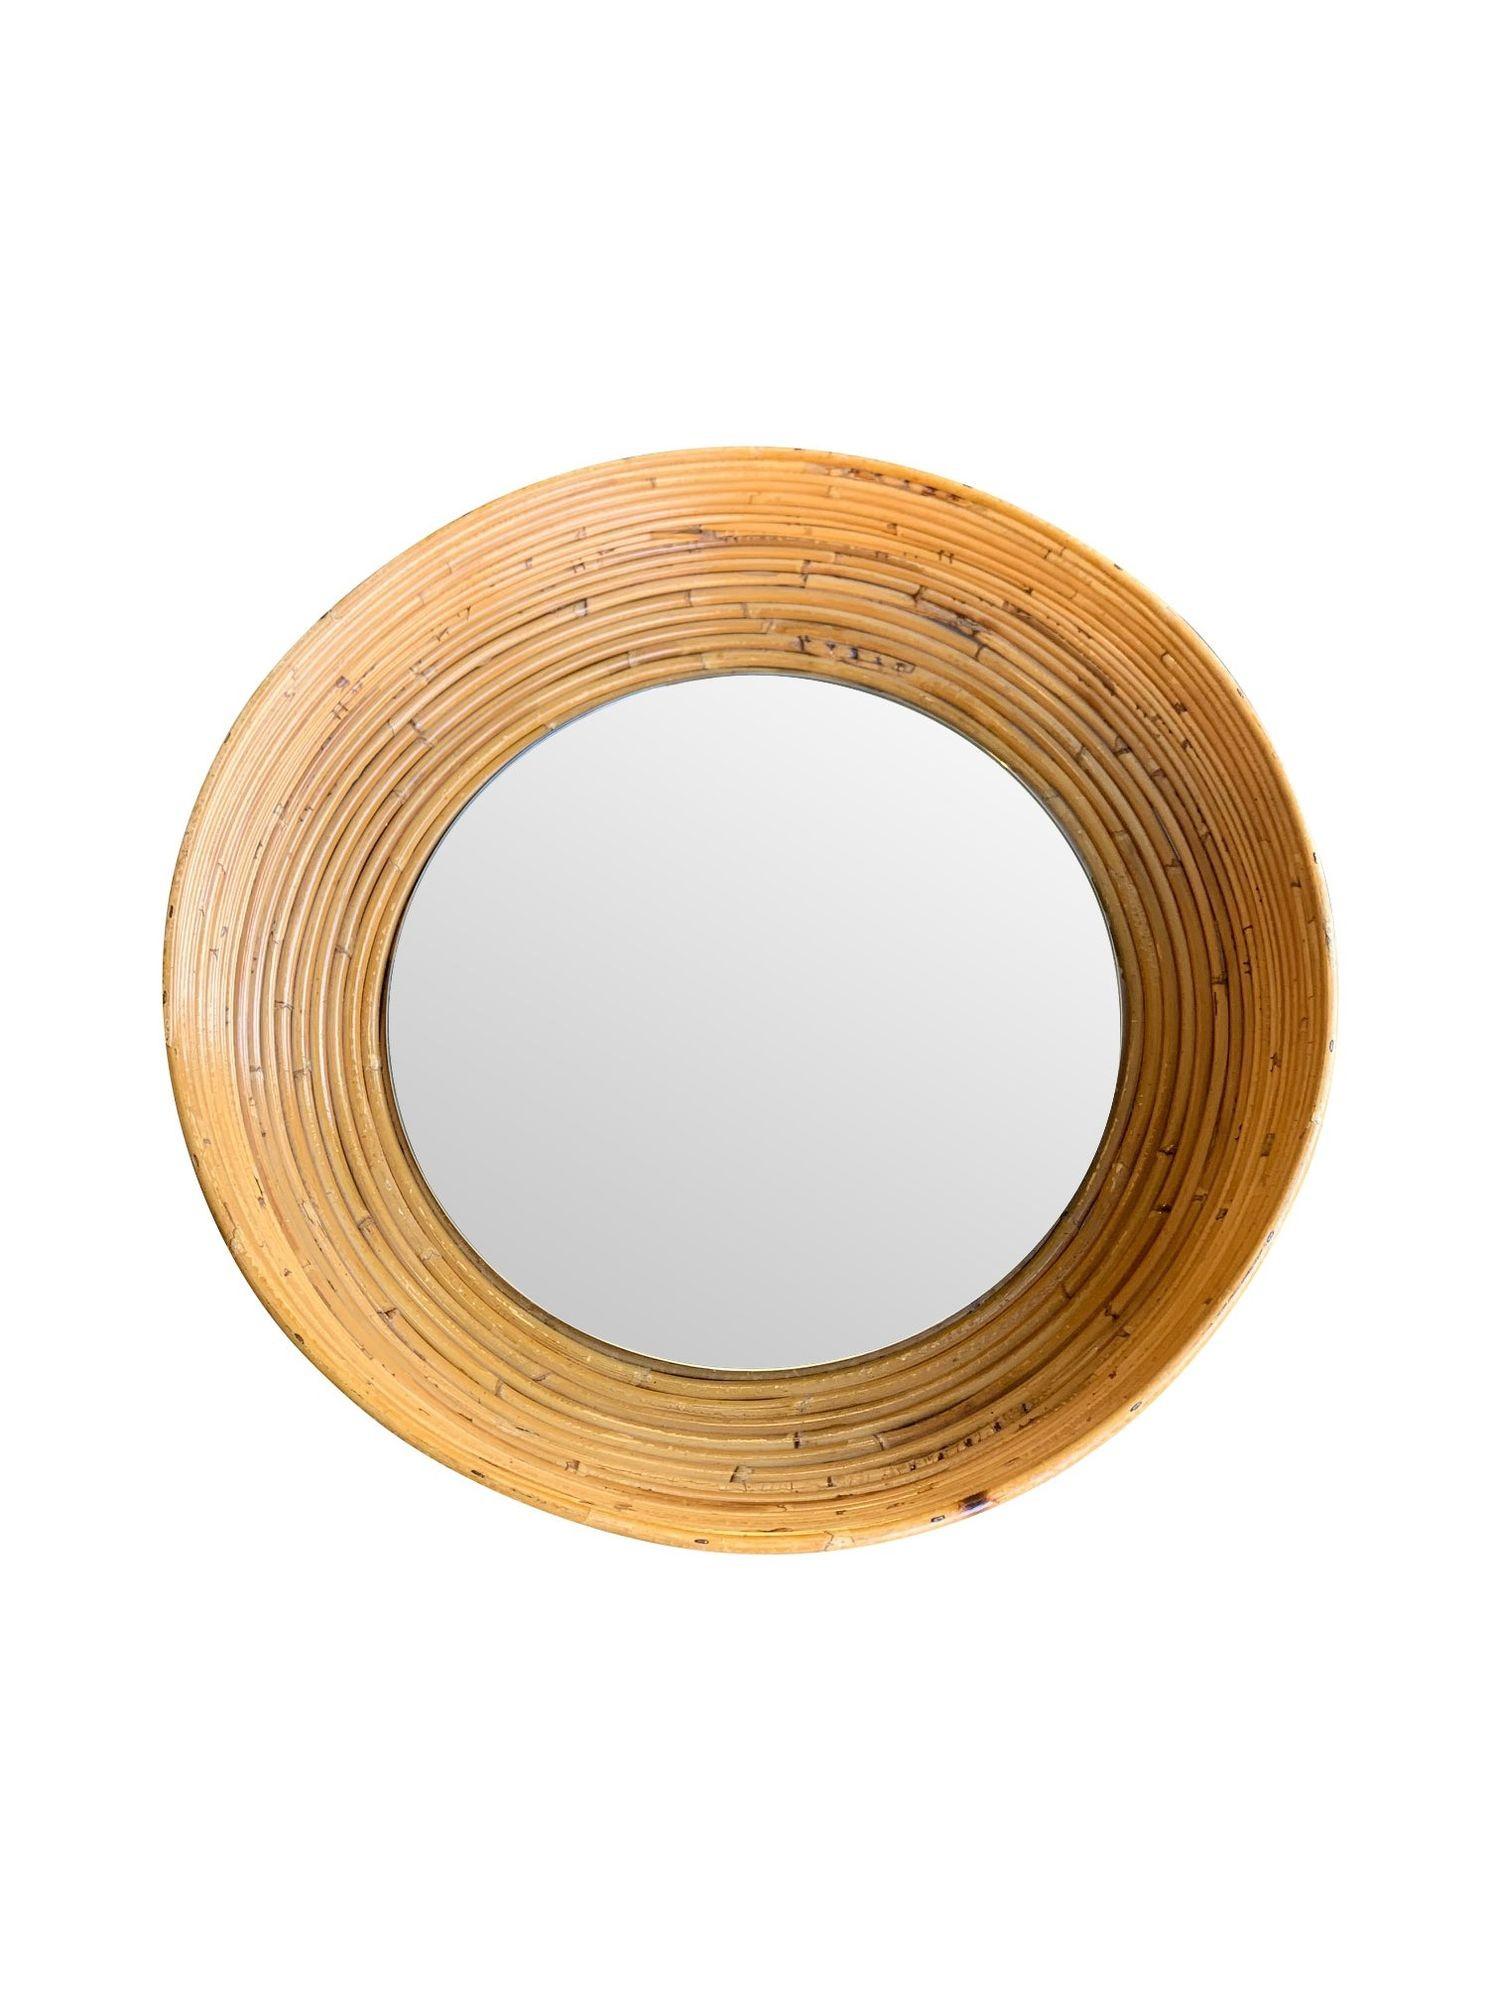 An Italian 1970s circular pencil reed bamboo mirror with three dimensional bowl like frame with the mirror plate recessed at the base.